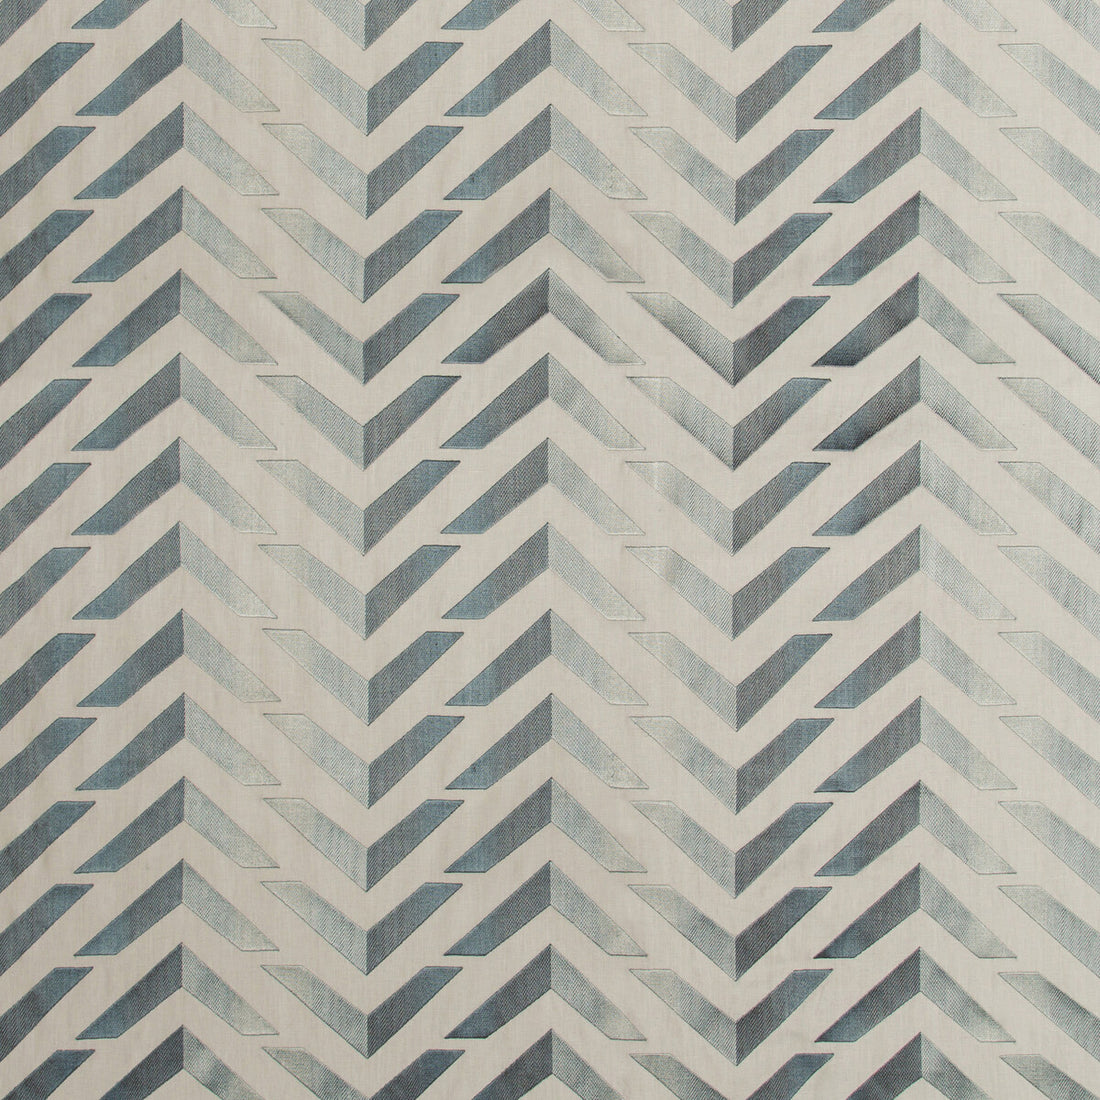 Les Vagues Emb fabric in blue/slate color - pattern 8017128.511.0 - by Brunschwig &amp; Fils in the Les Ensembliers II collection